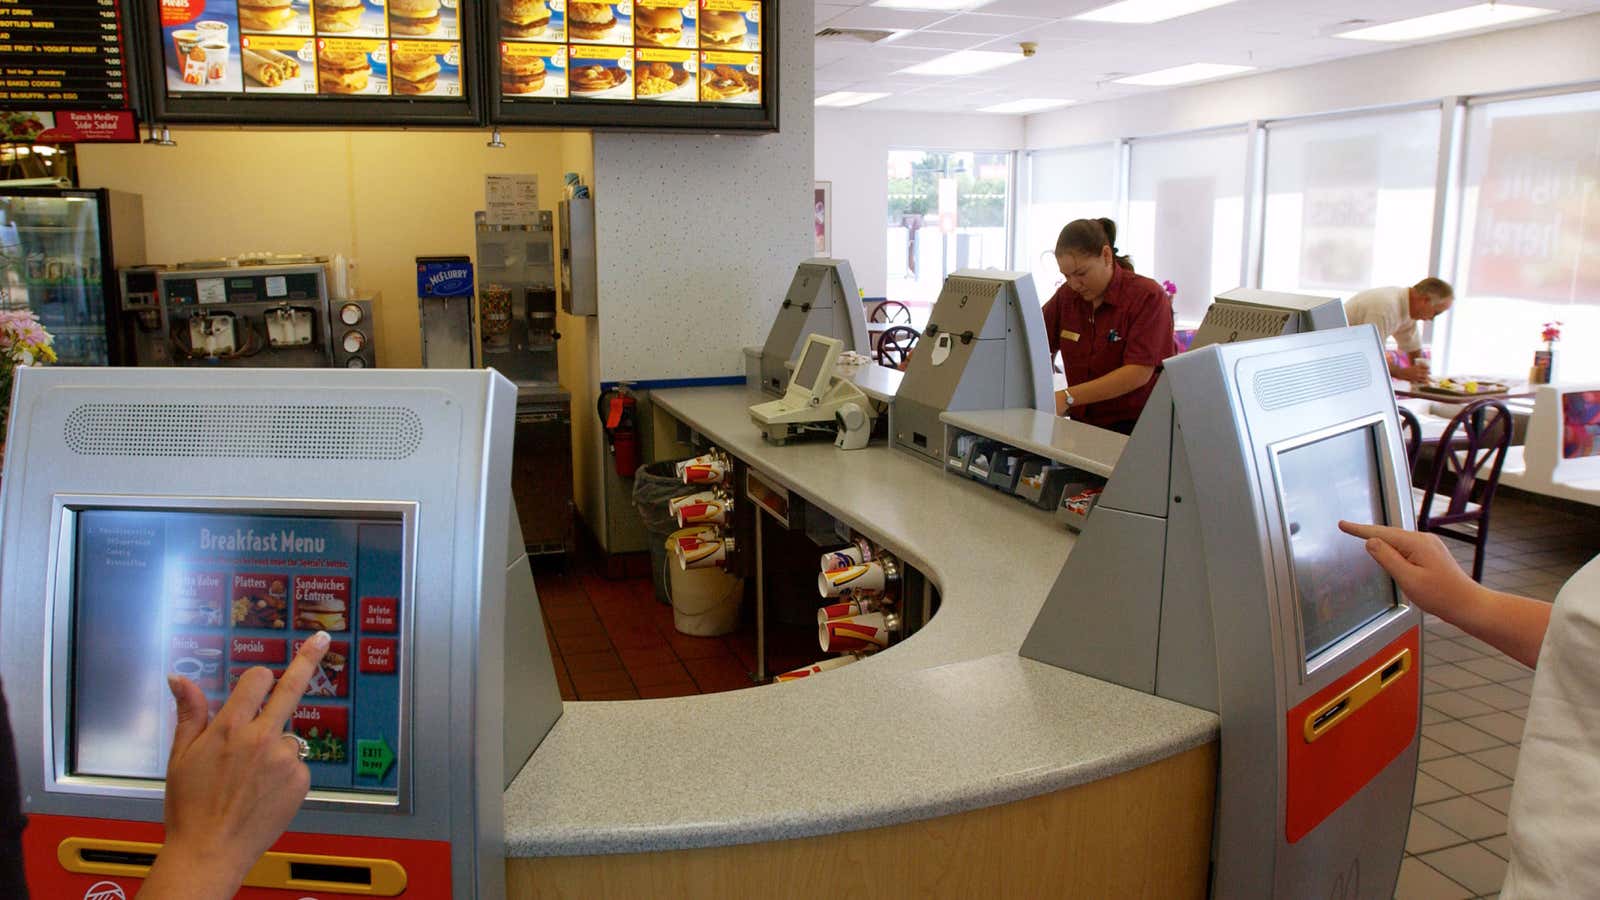 Customers at McDonald’s place breakfast orders through kiosk systems introduced in 2003.